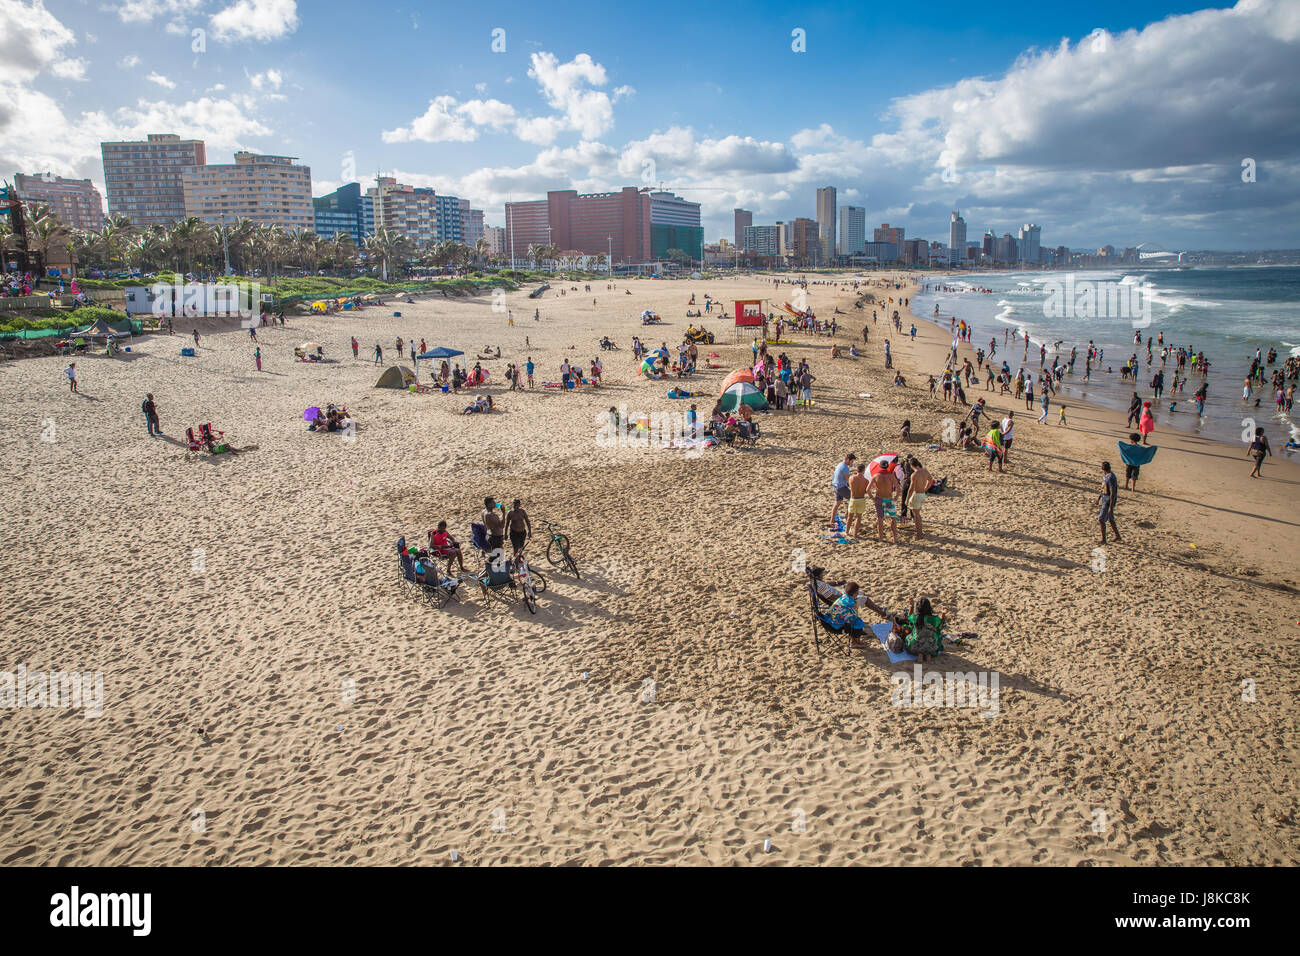 Durban, South Africa - 16 JANUARY 2015, A beautiful view of the beach where people are playing with the waves Stock Photo